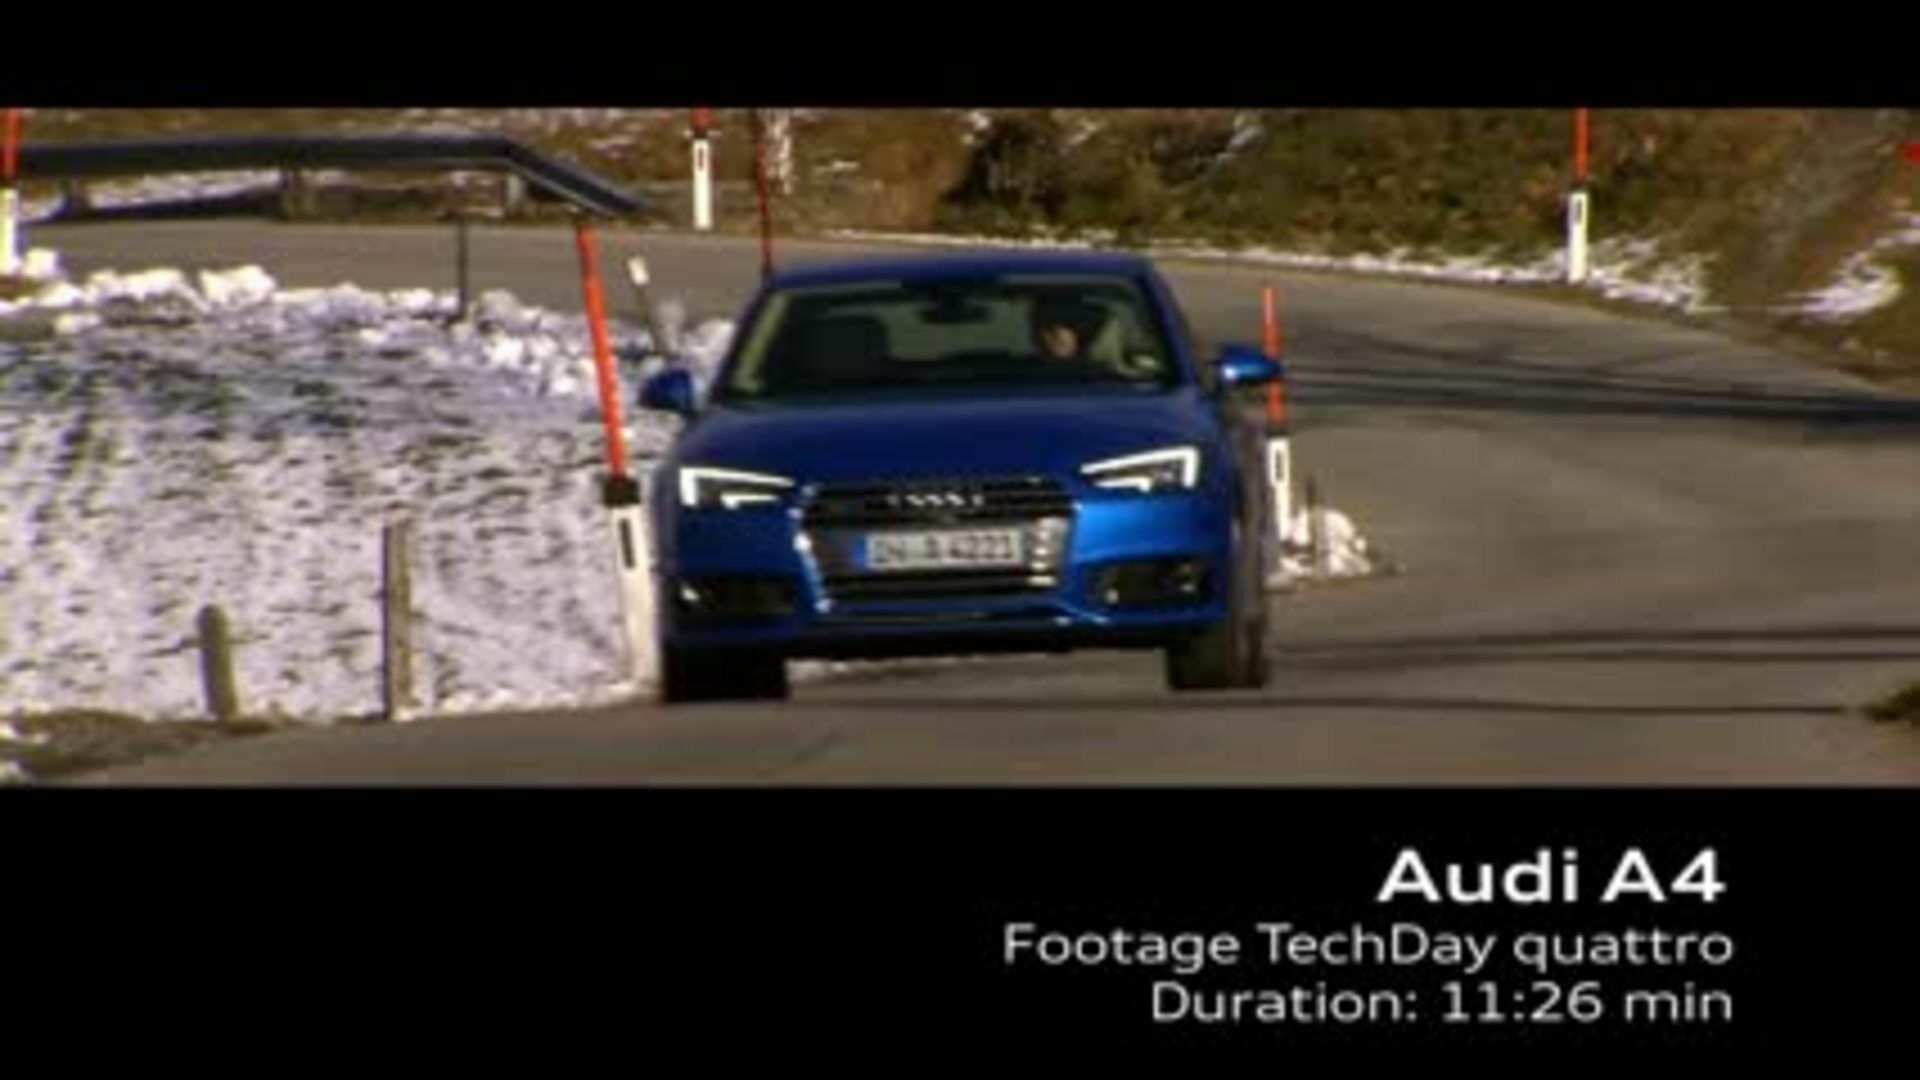 quattro with ultra technology - Footage